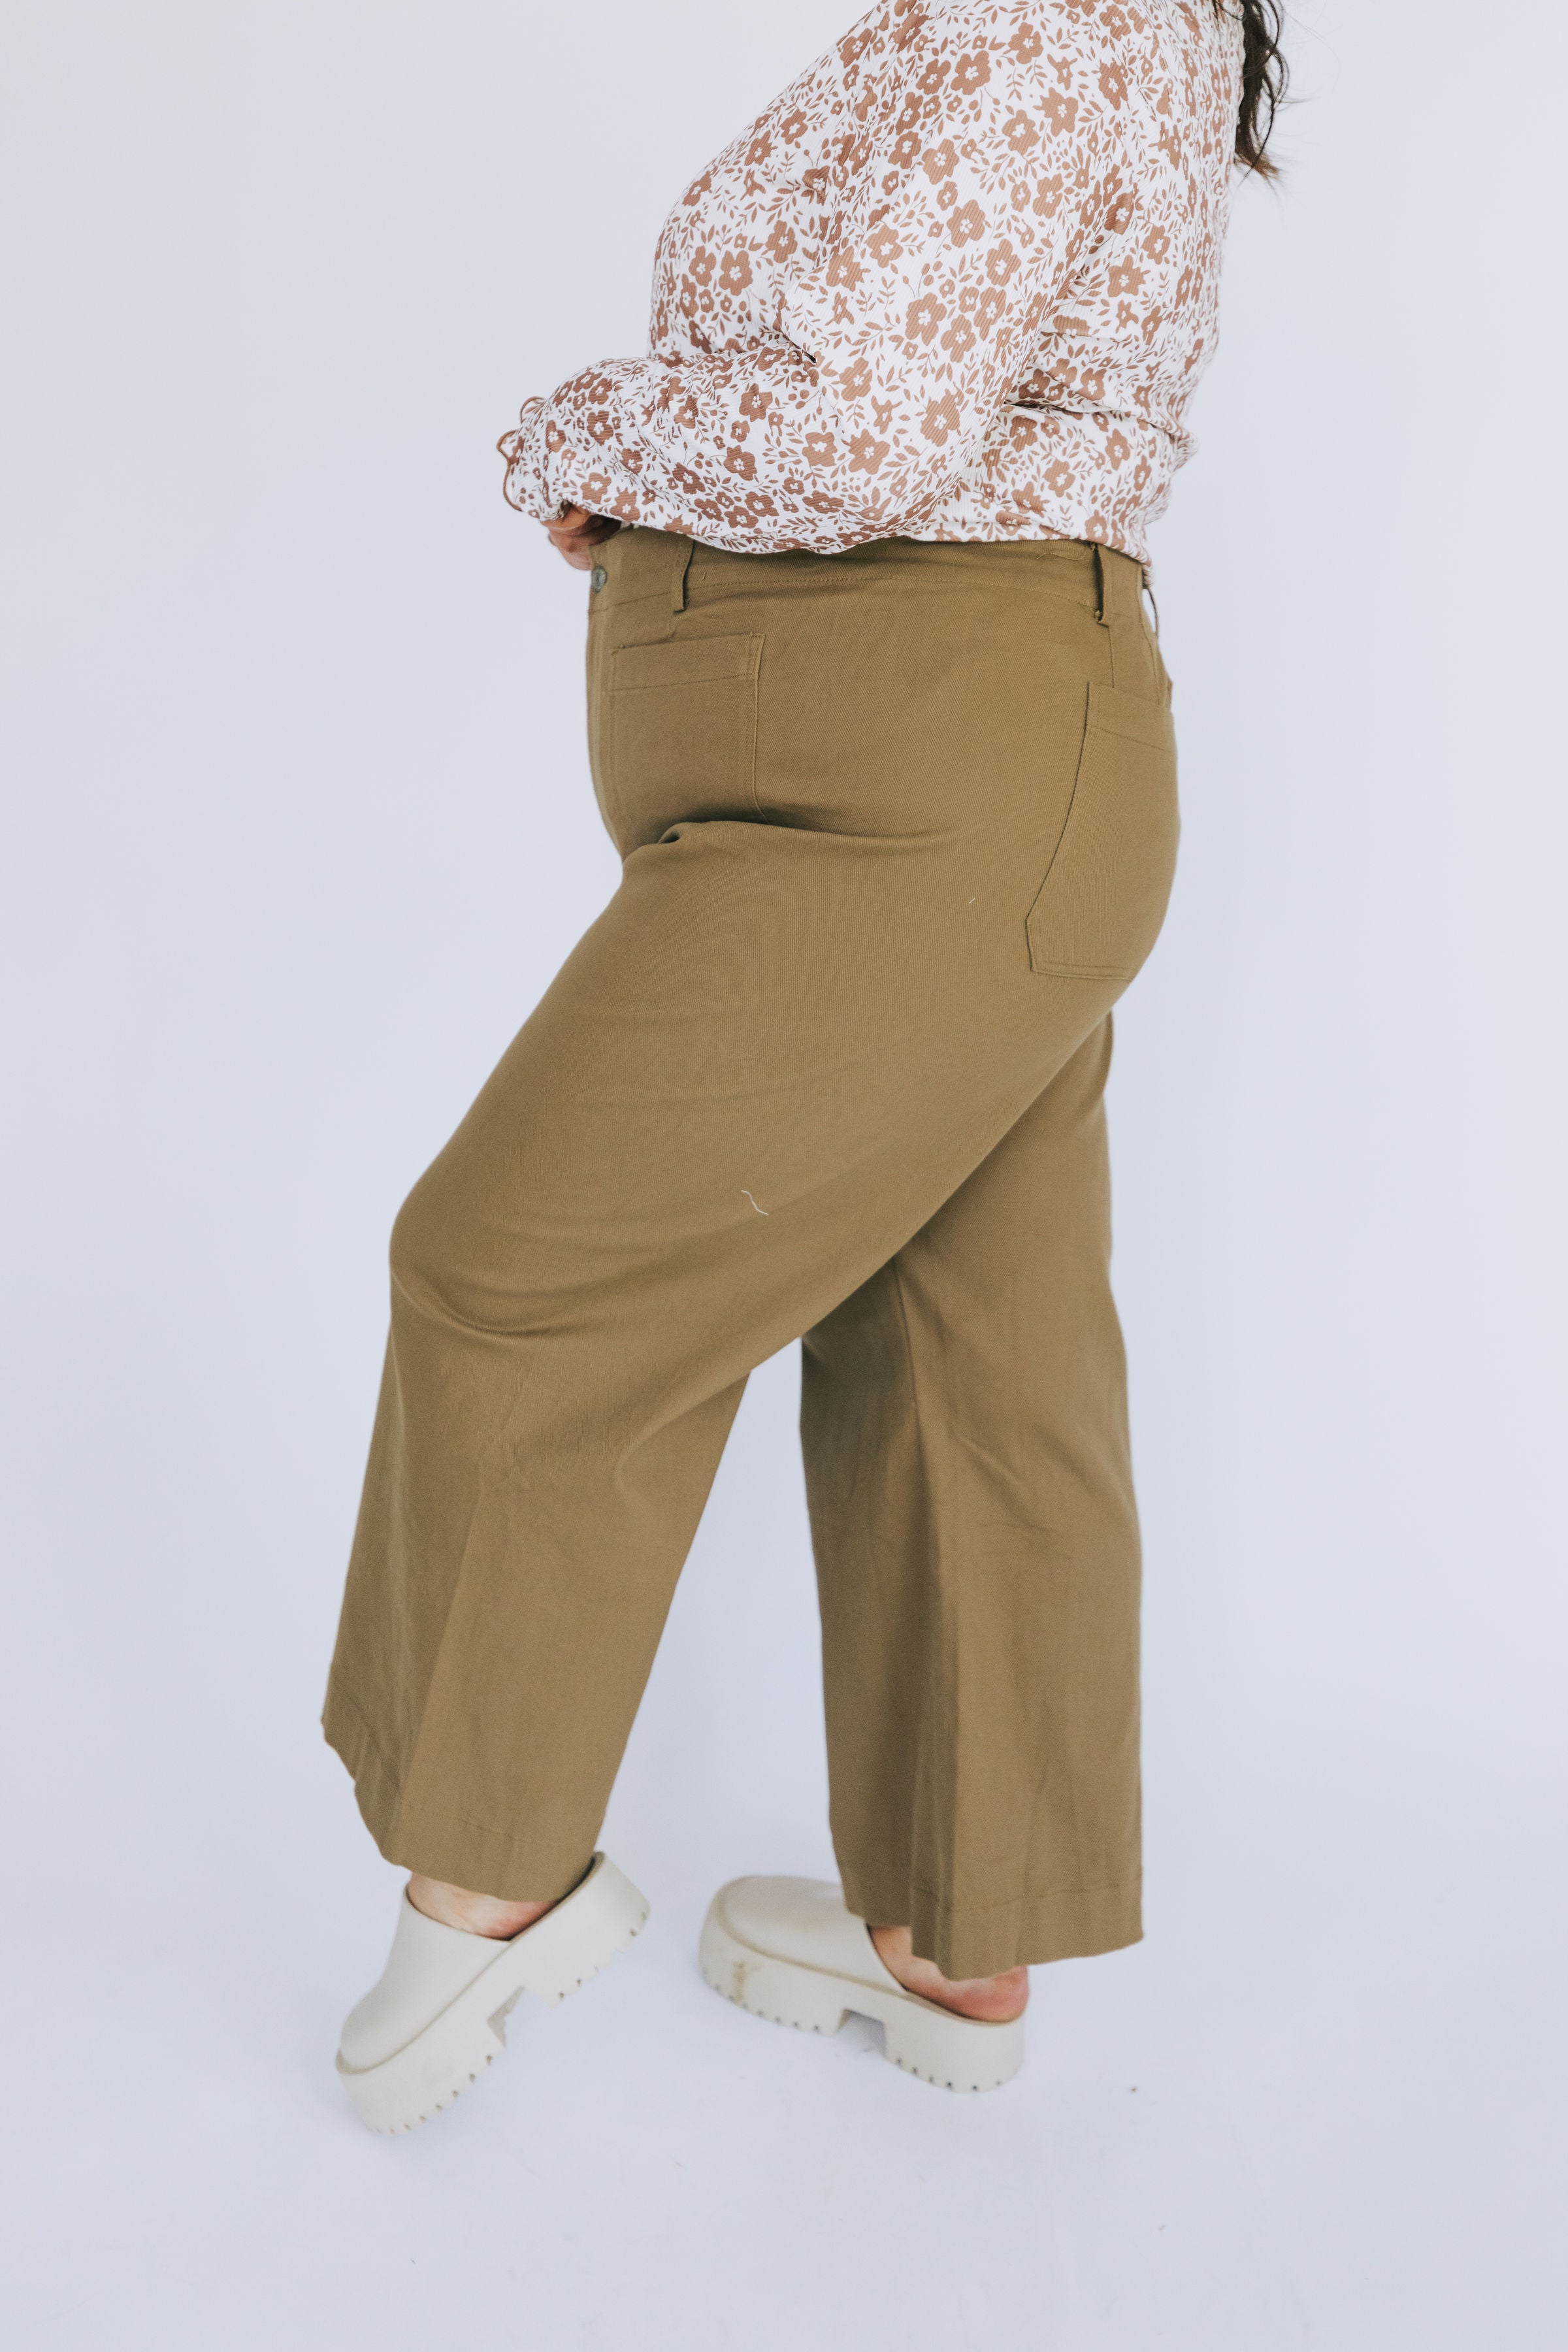 PLUS SIZE - Find Serenity Pants